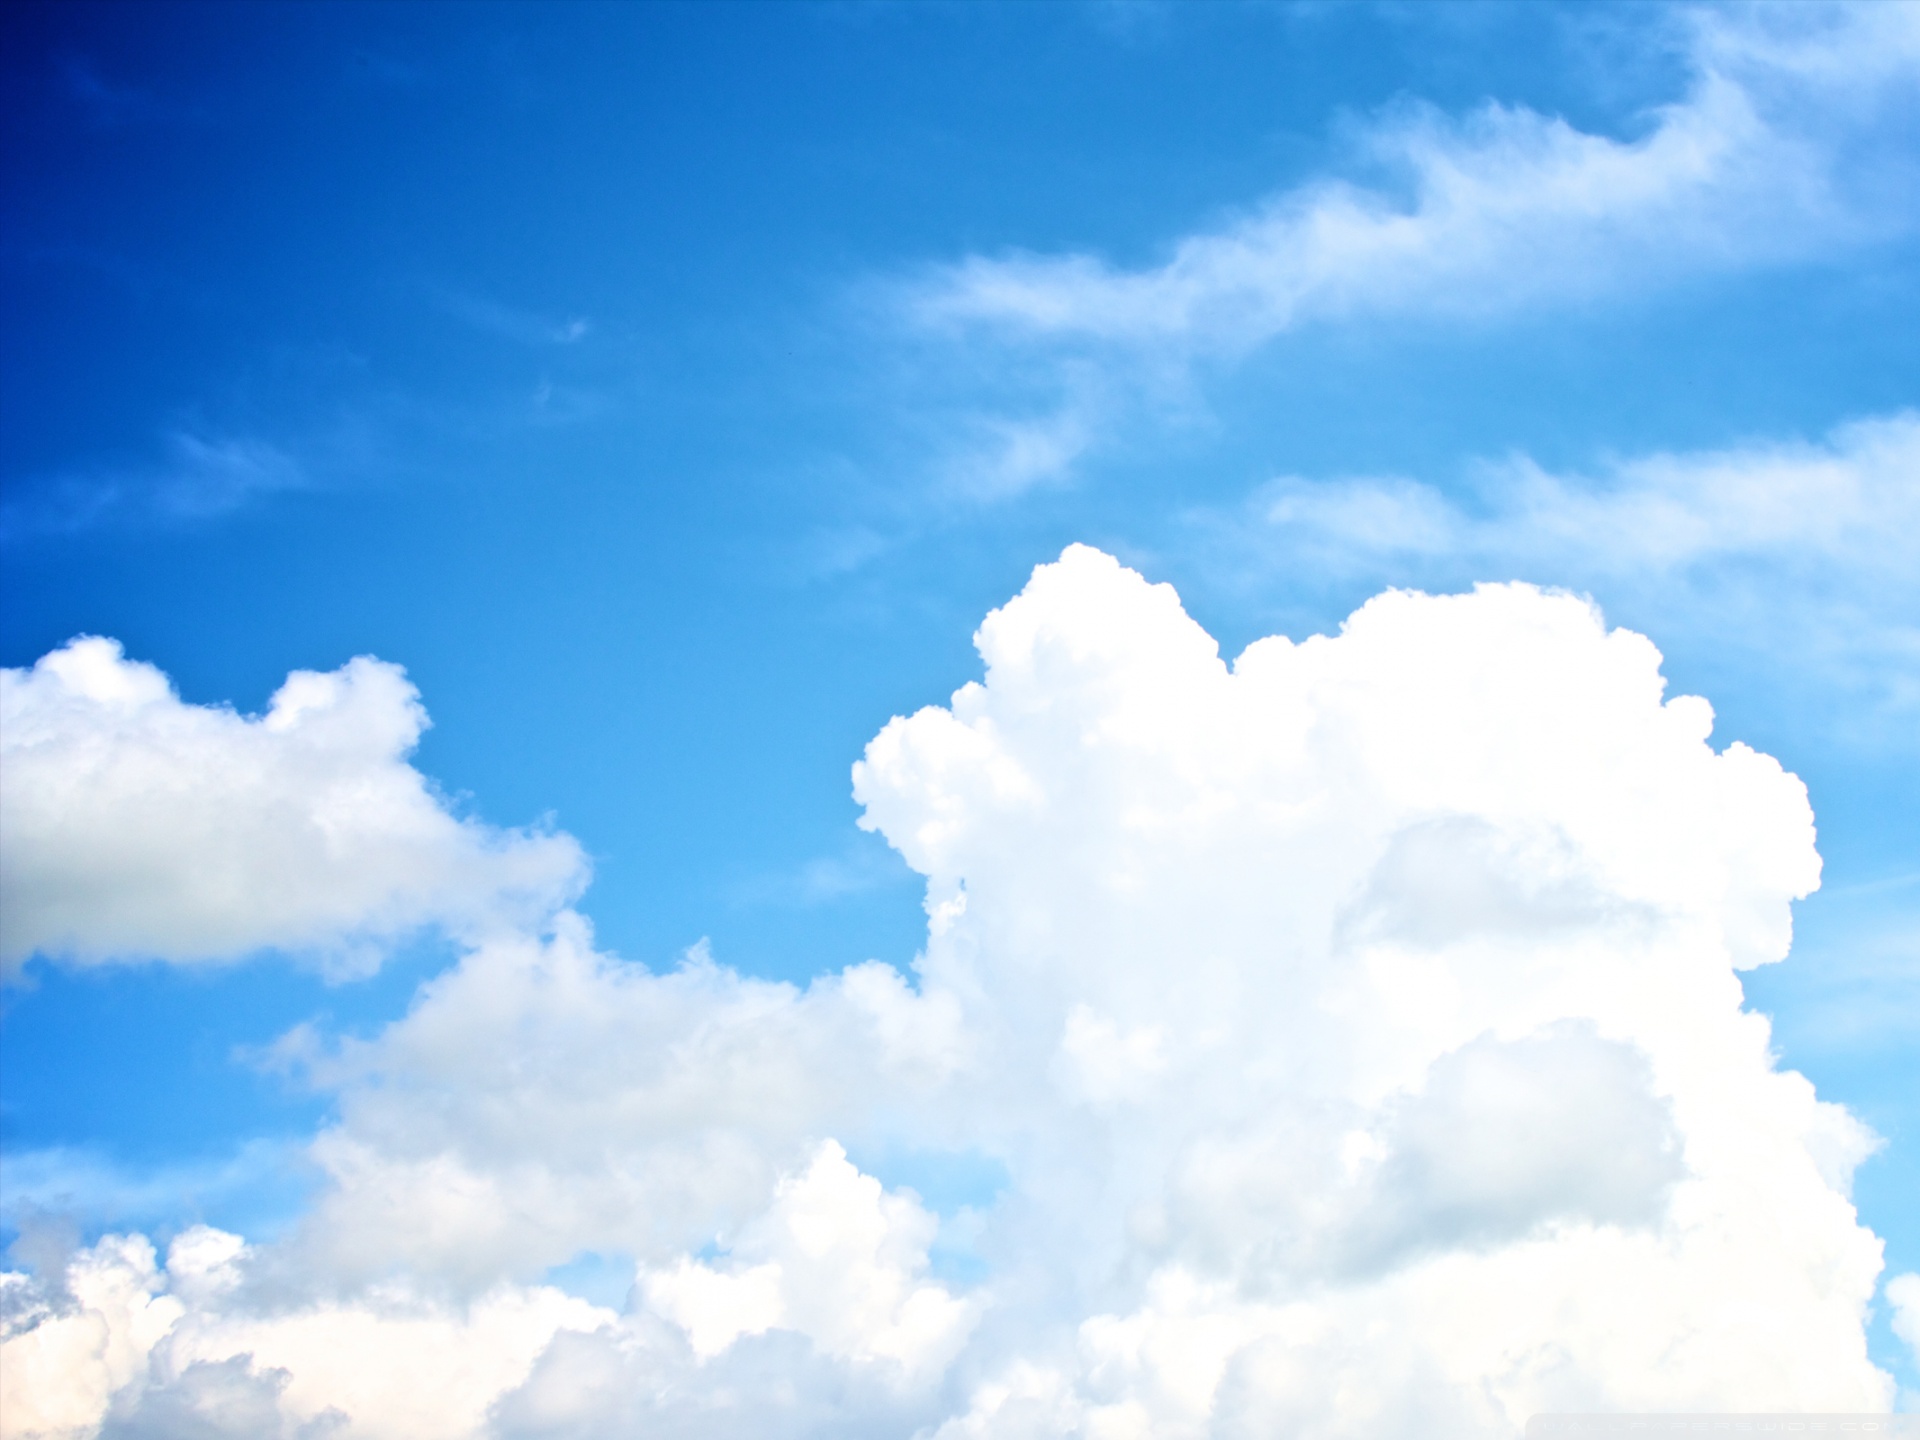 White Clouds In The Sky Ultra HD Desktop Background Wallpaper for 4K UHD TV  : Tablet : Smartphone